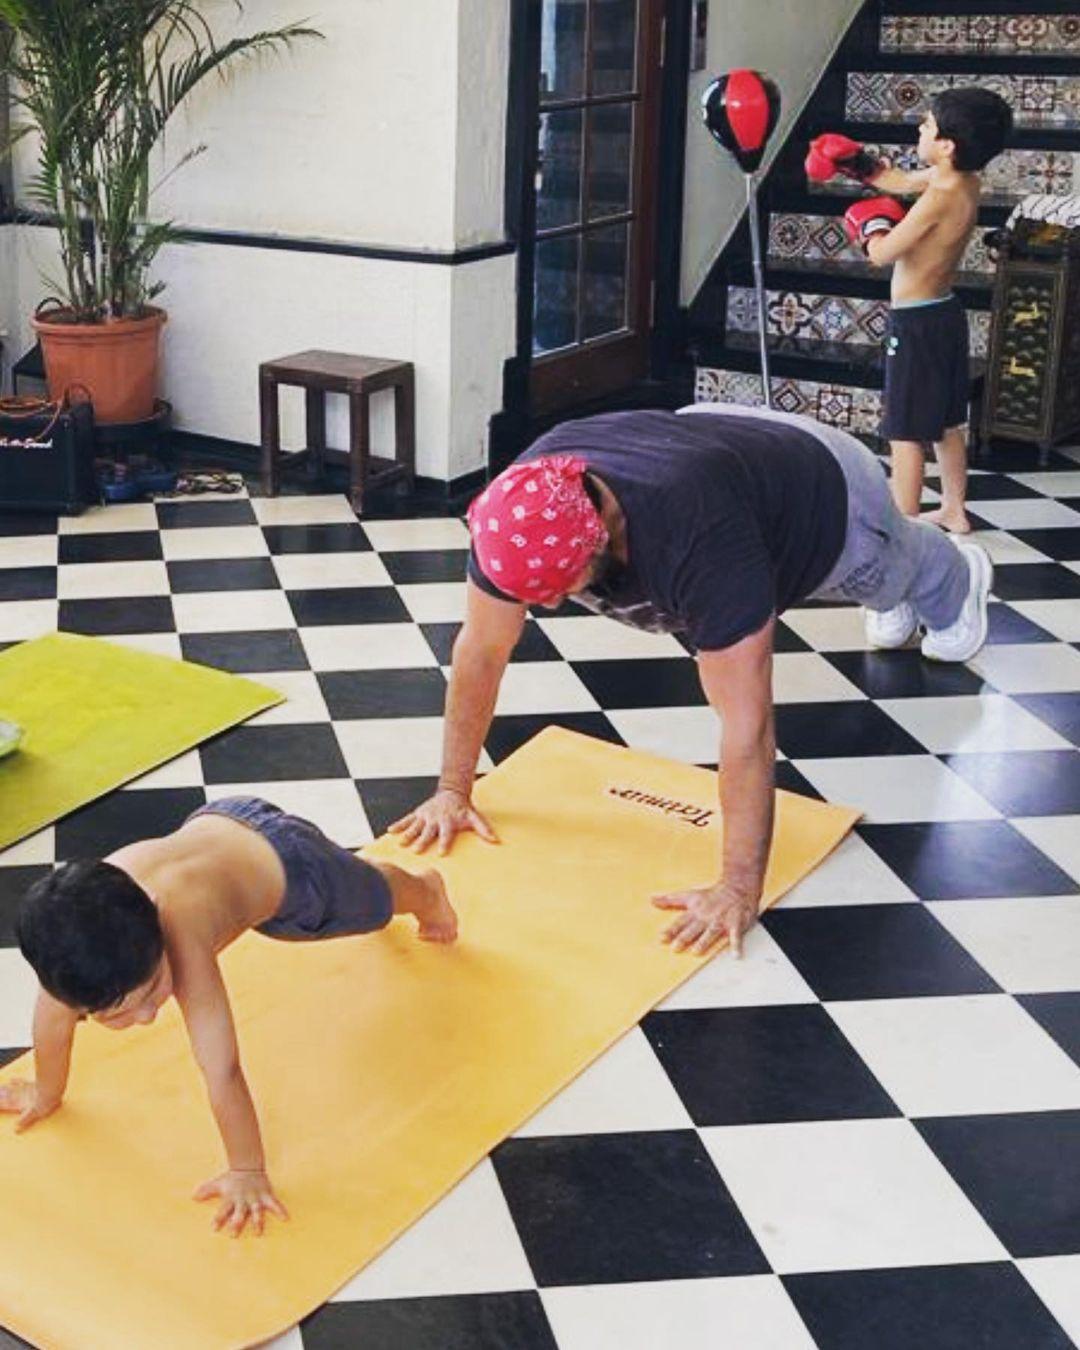 We all know that Kareena Kapoor Khan is a huge yoga enthusiast. But on International Yoga Day, instead of posting her own photo, the actress chose to share photos of her husband Saif Ali Khan and two sons engaging in fitness activities